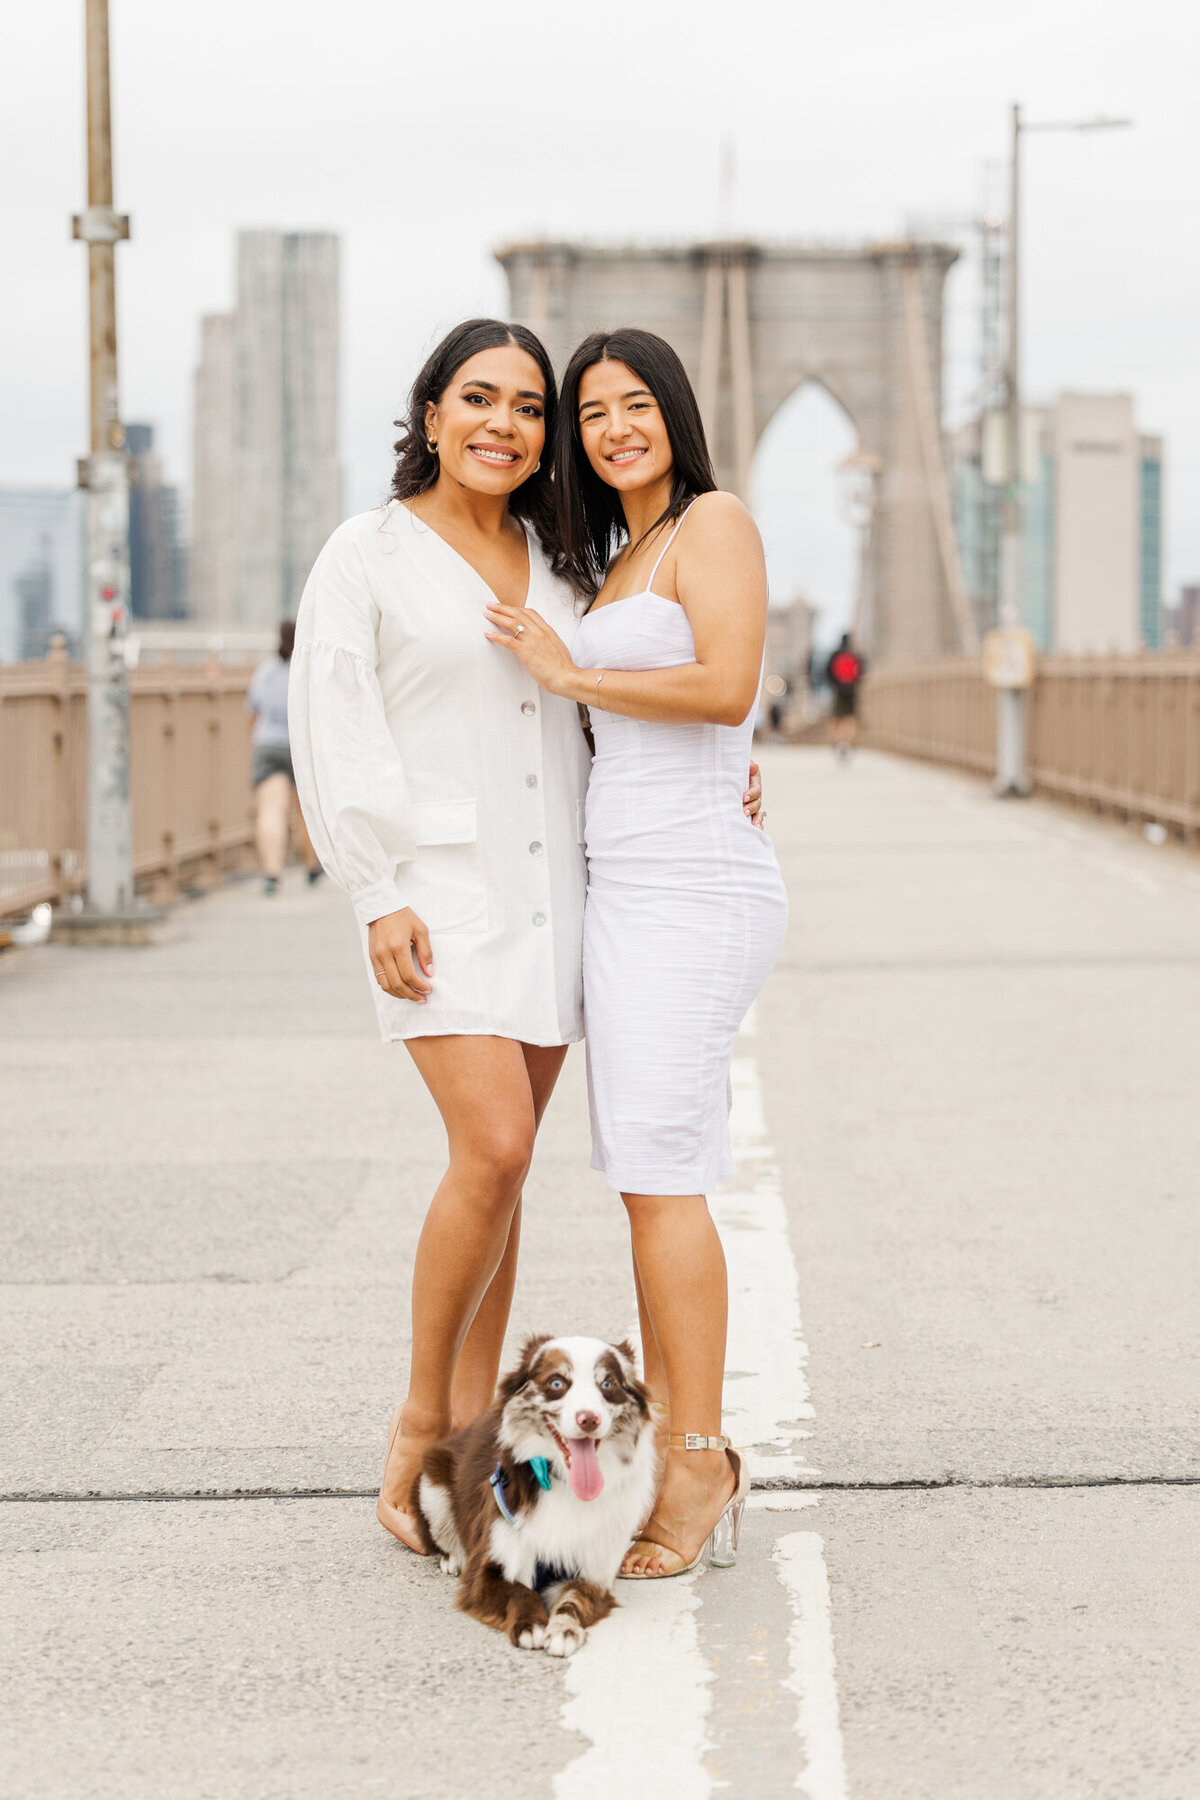 LeilanySteph_Engagement_56_2021_KG_4425